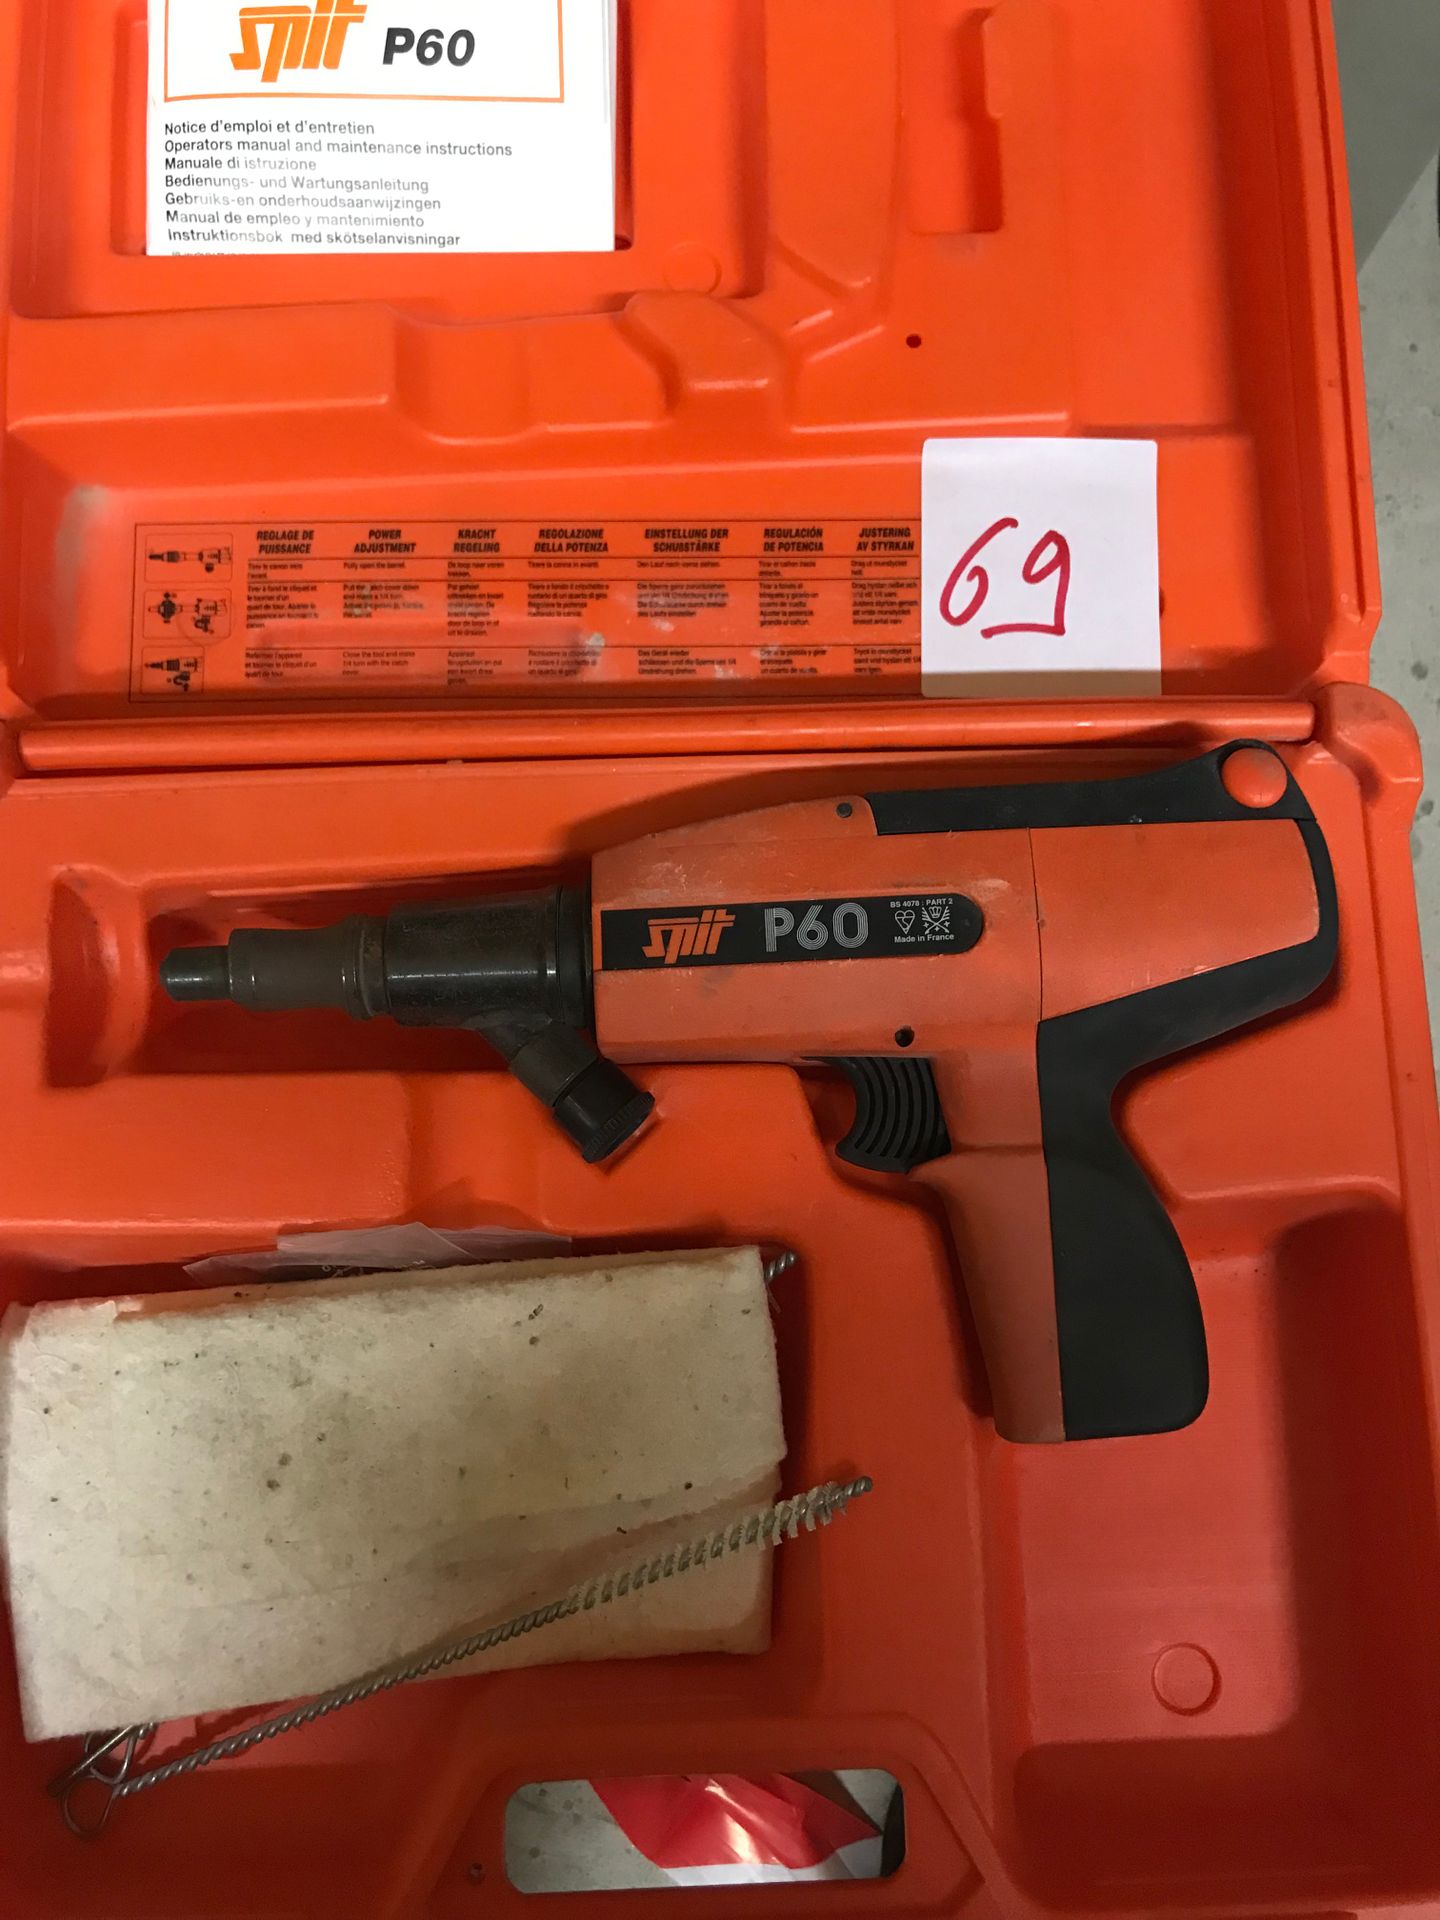 Null 1 SPIT type P60 cartridge nailer with case